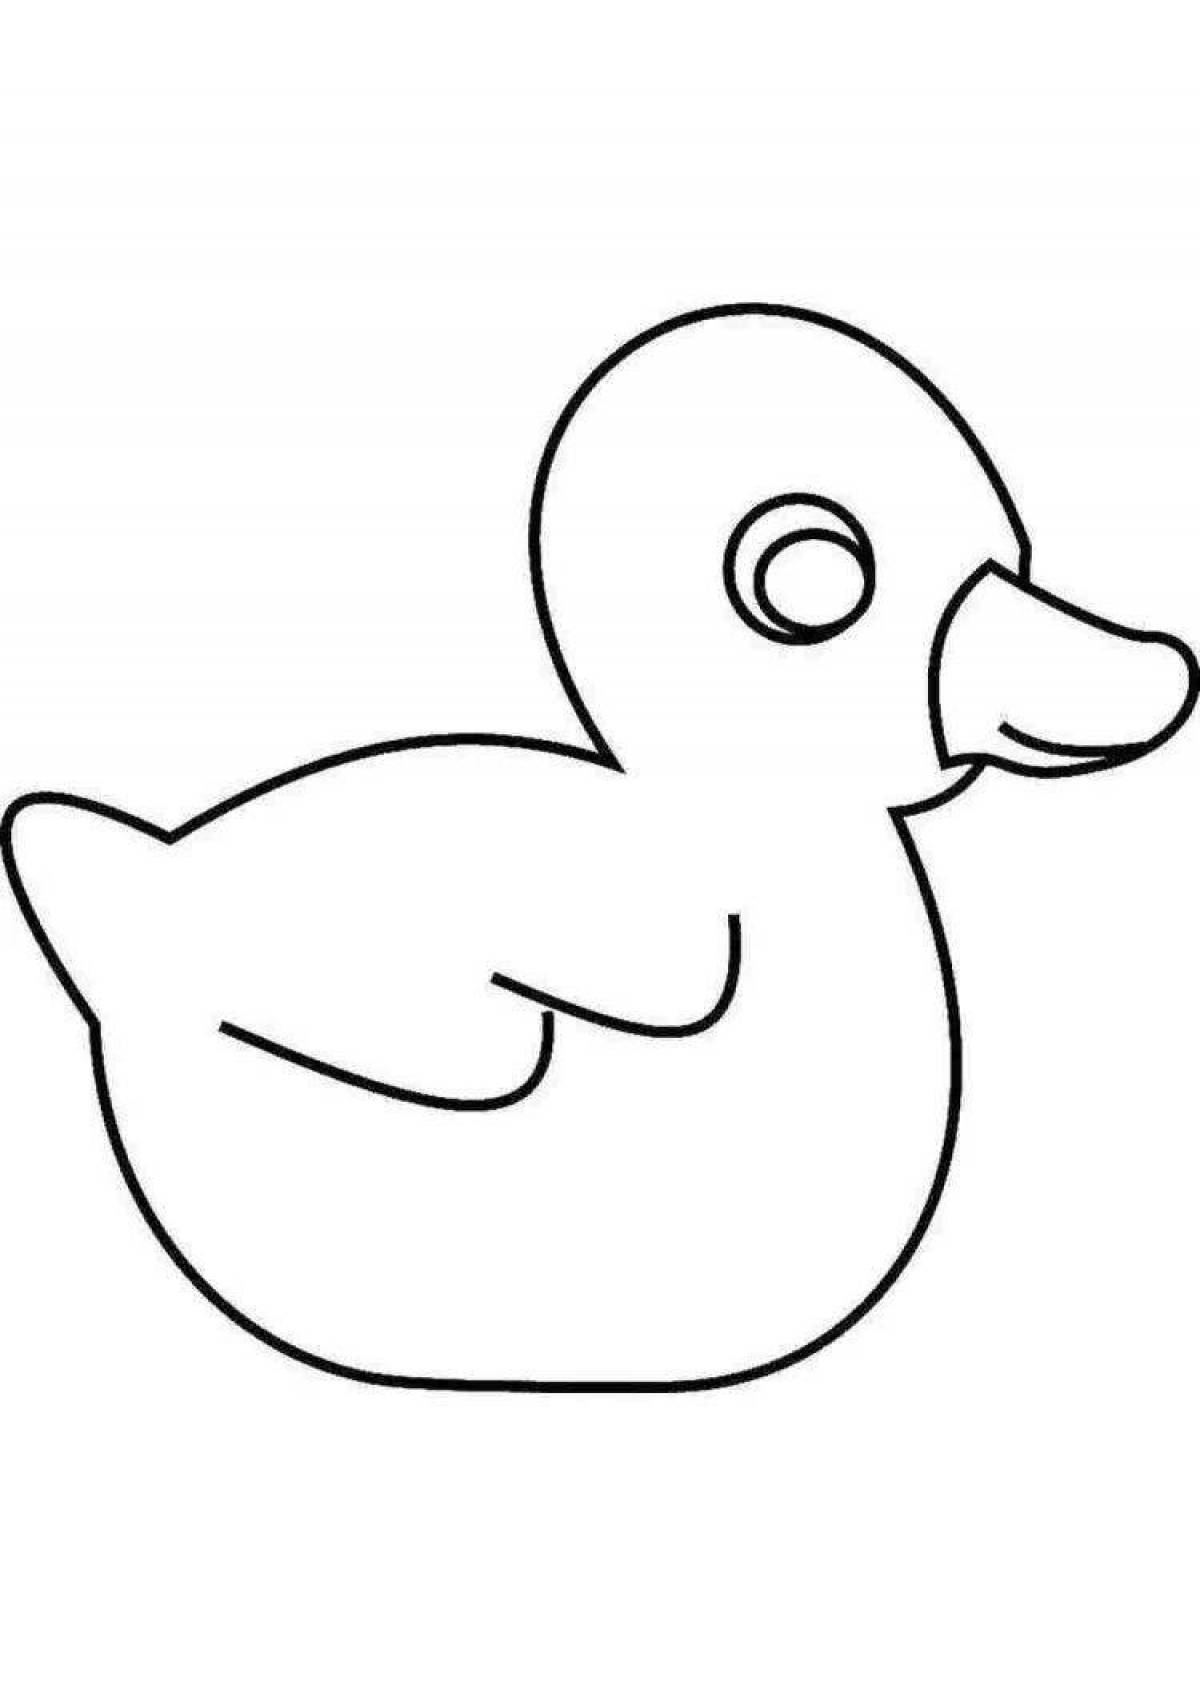 Outstanding duck coloring page for kids